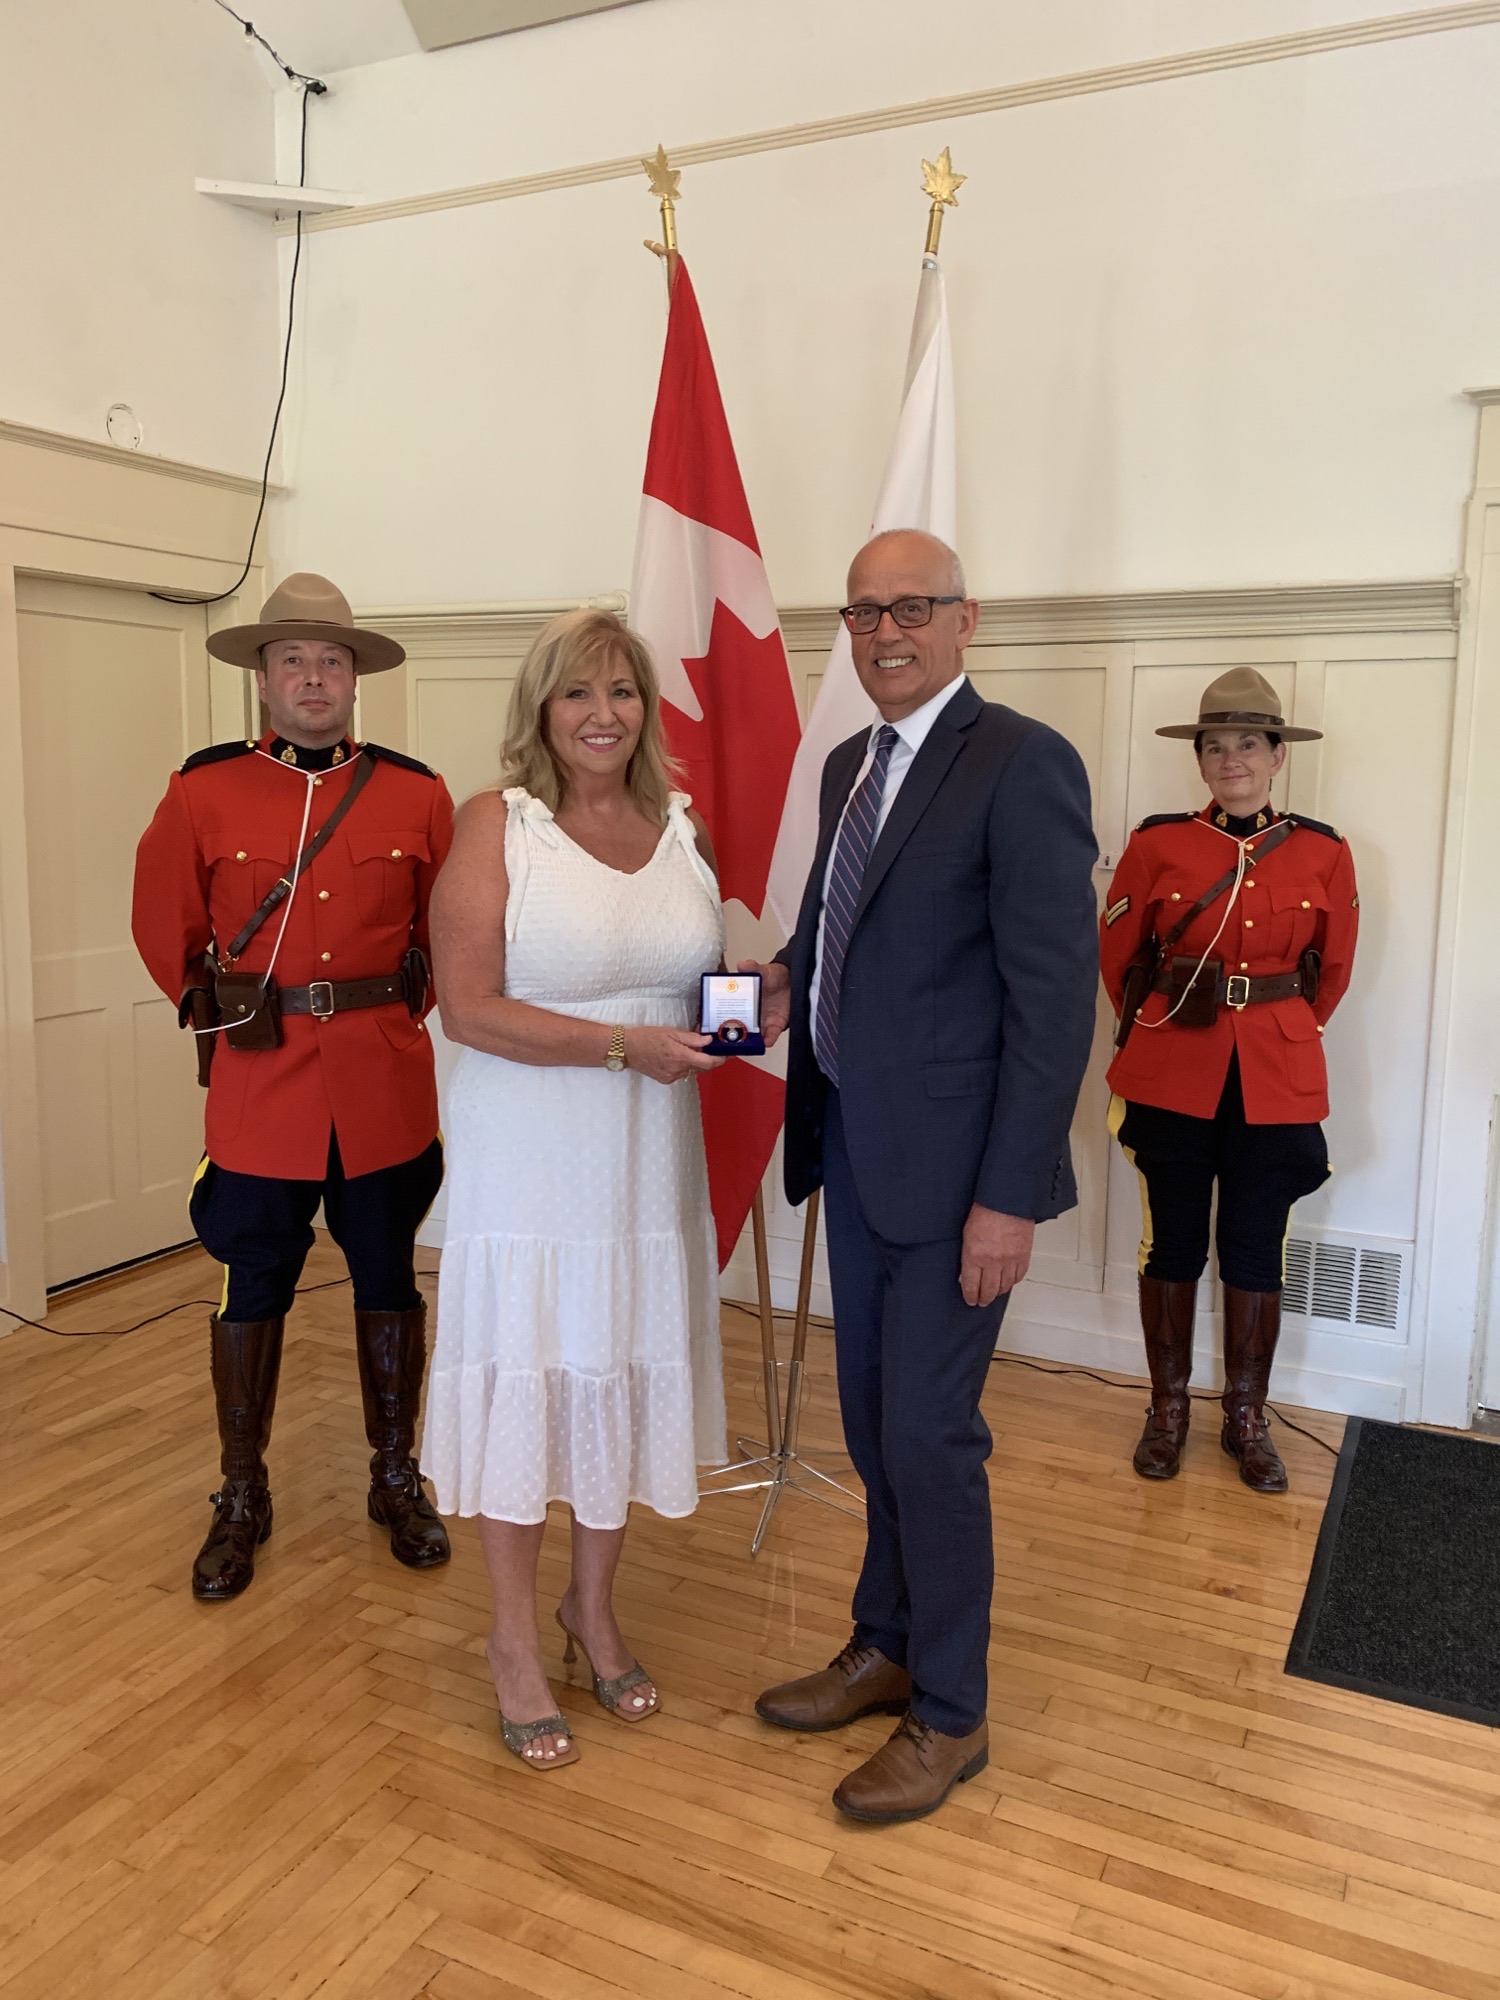 On July 19, 2022, at the Fort Langley Community Hall, Langley-Aldergrove MP – Tako Van Popta handed out the Queen Elizabeth II Platinum Jubilee award to Deborah Silvester, an outstanding Canadian who has contributed to making Canada a better country by improving lives around her.